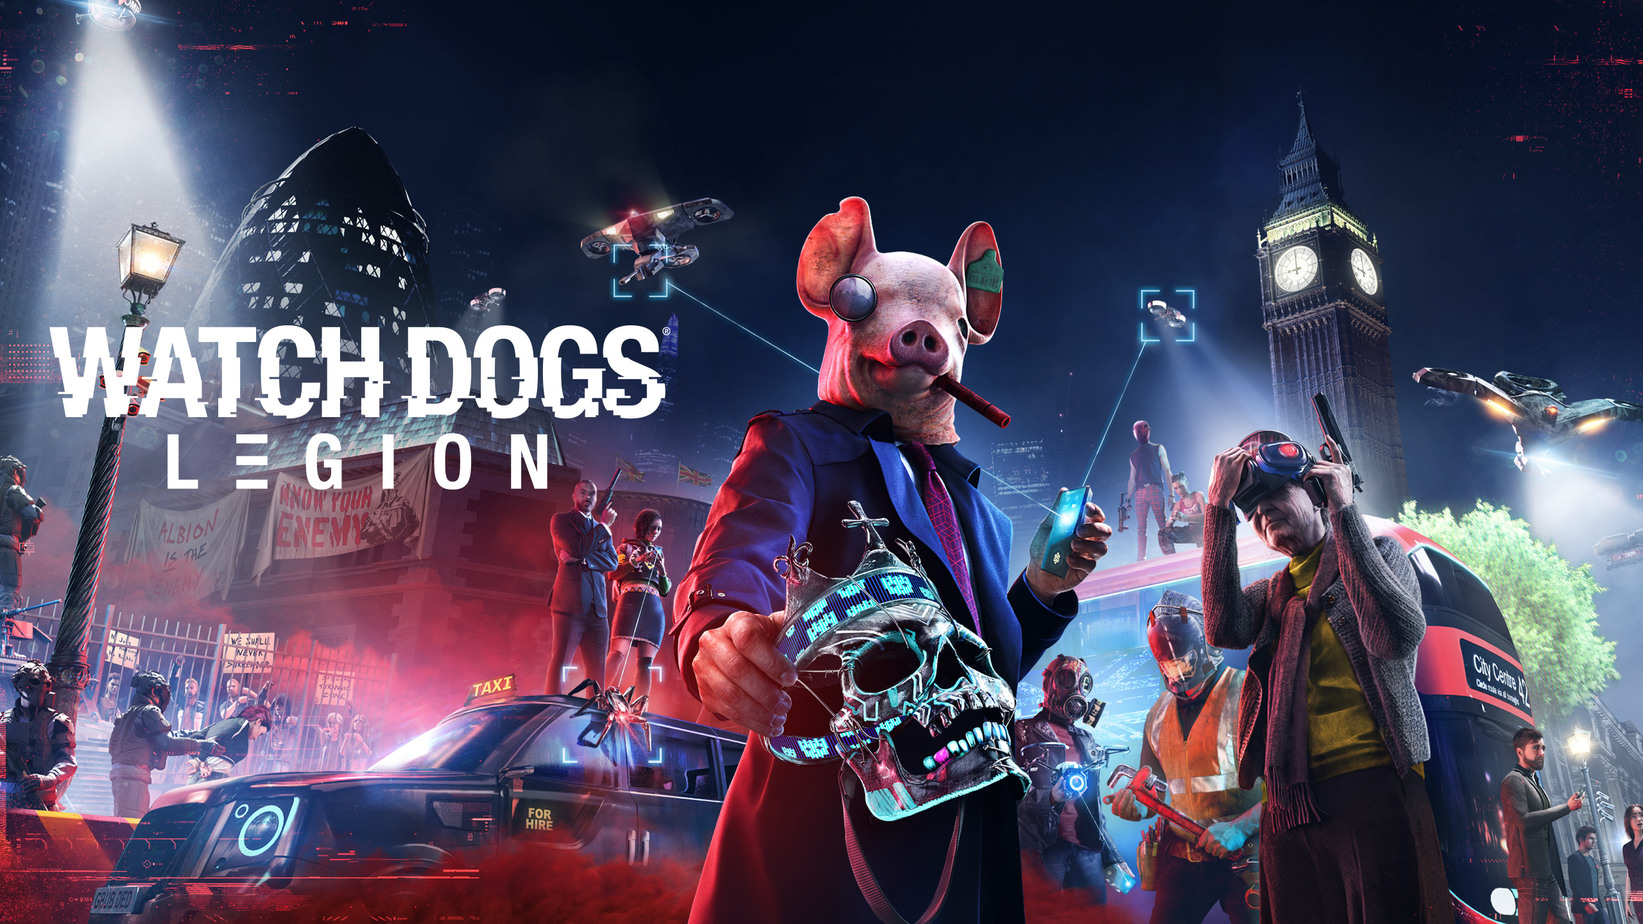 Watch Dogs Legion Cover